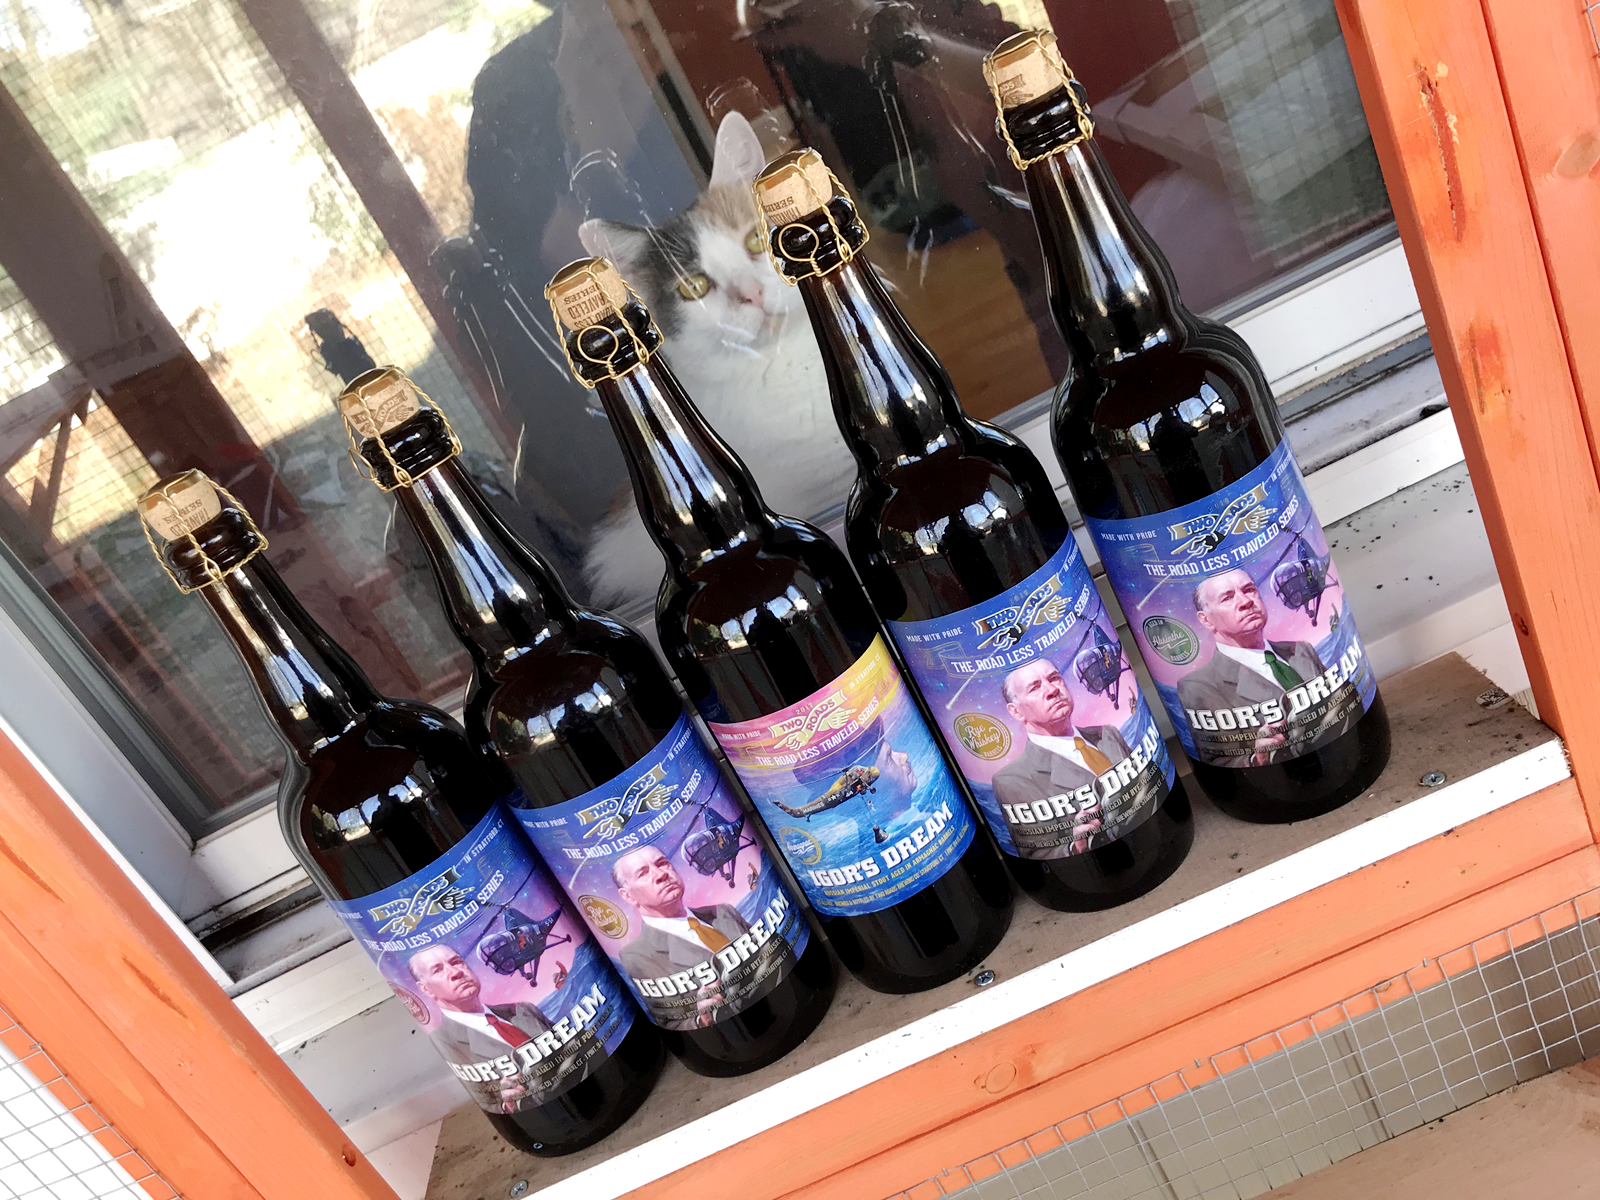 Two Roads' Igor's Dream Russian Imperial Stout Makes Its Return